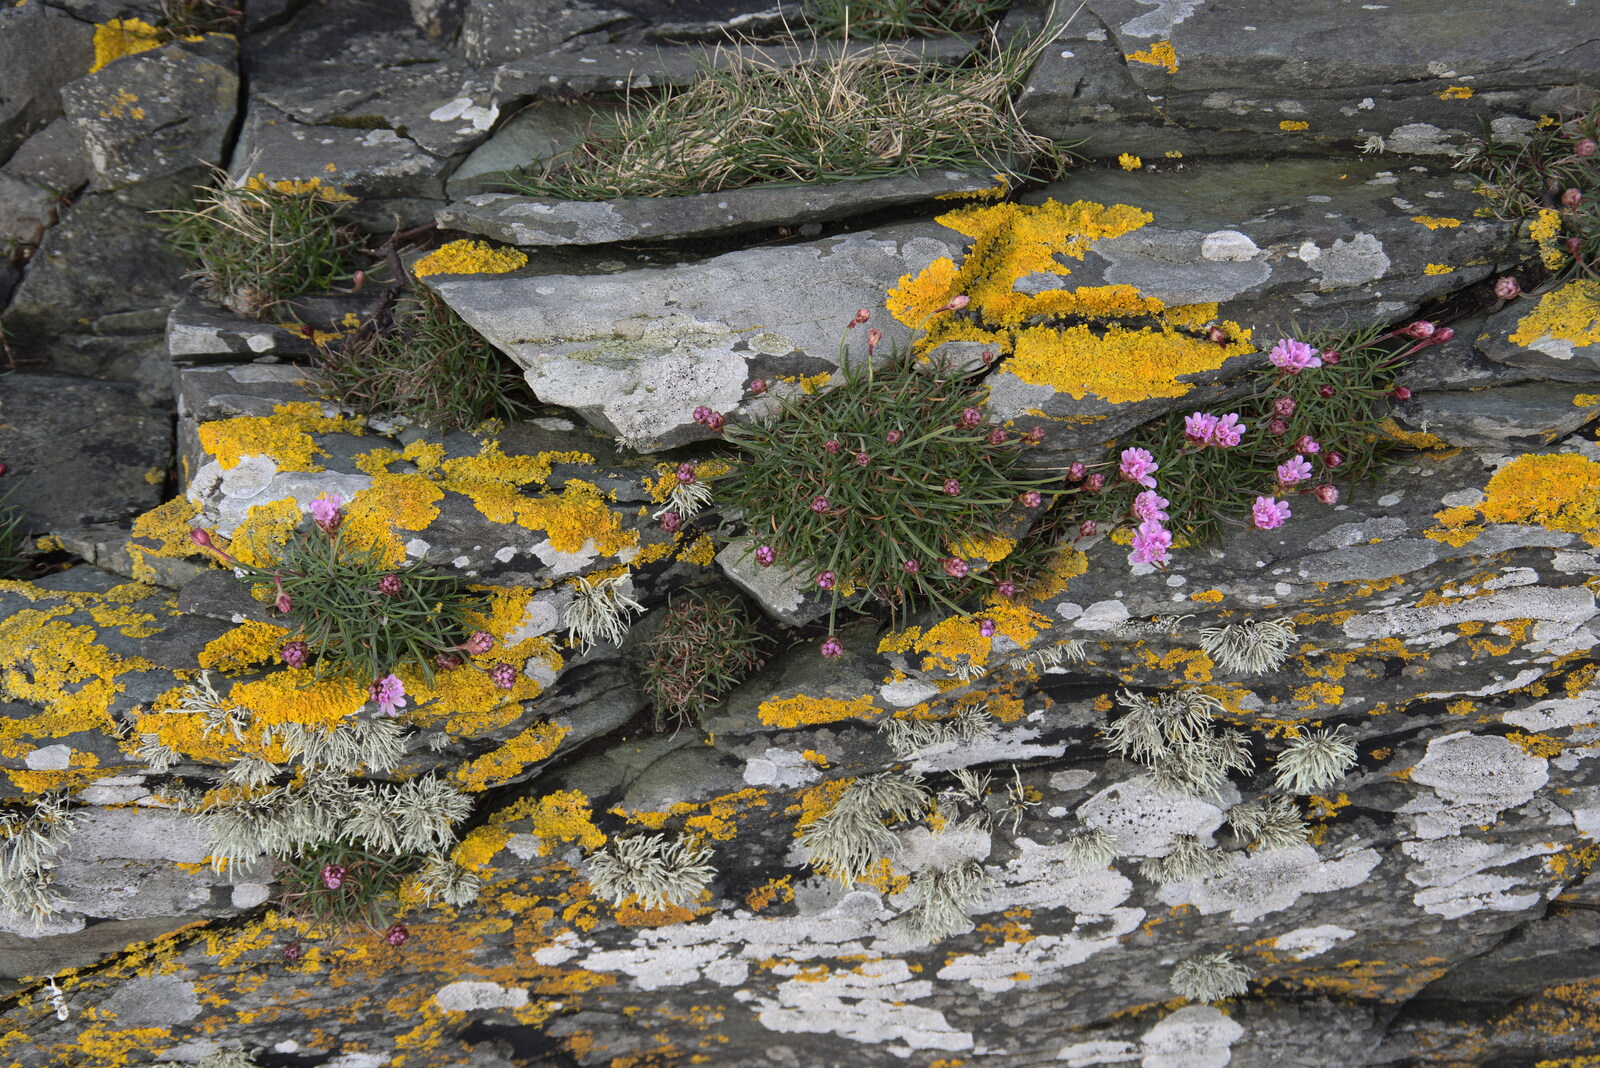 Greencastle, Doagh and Malin Head, County Donegal, Ireland - 19th April 2022: Pink flowers in the rocks